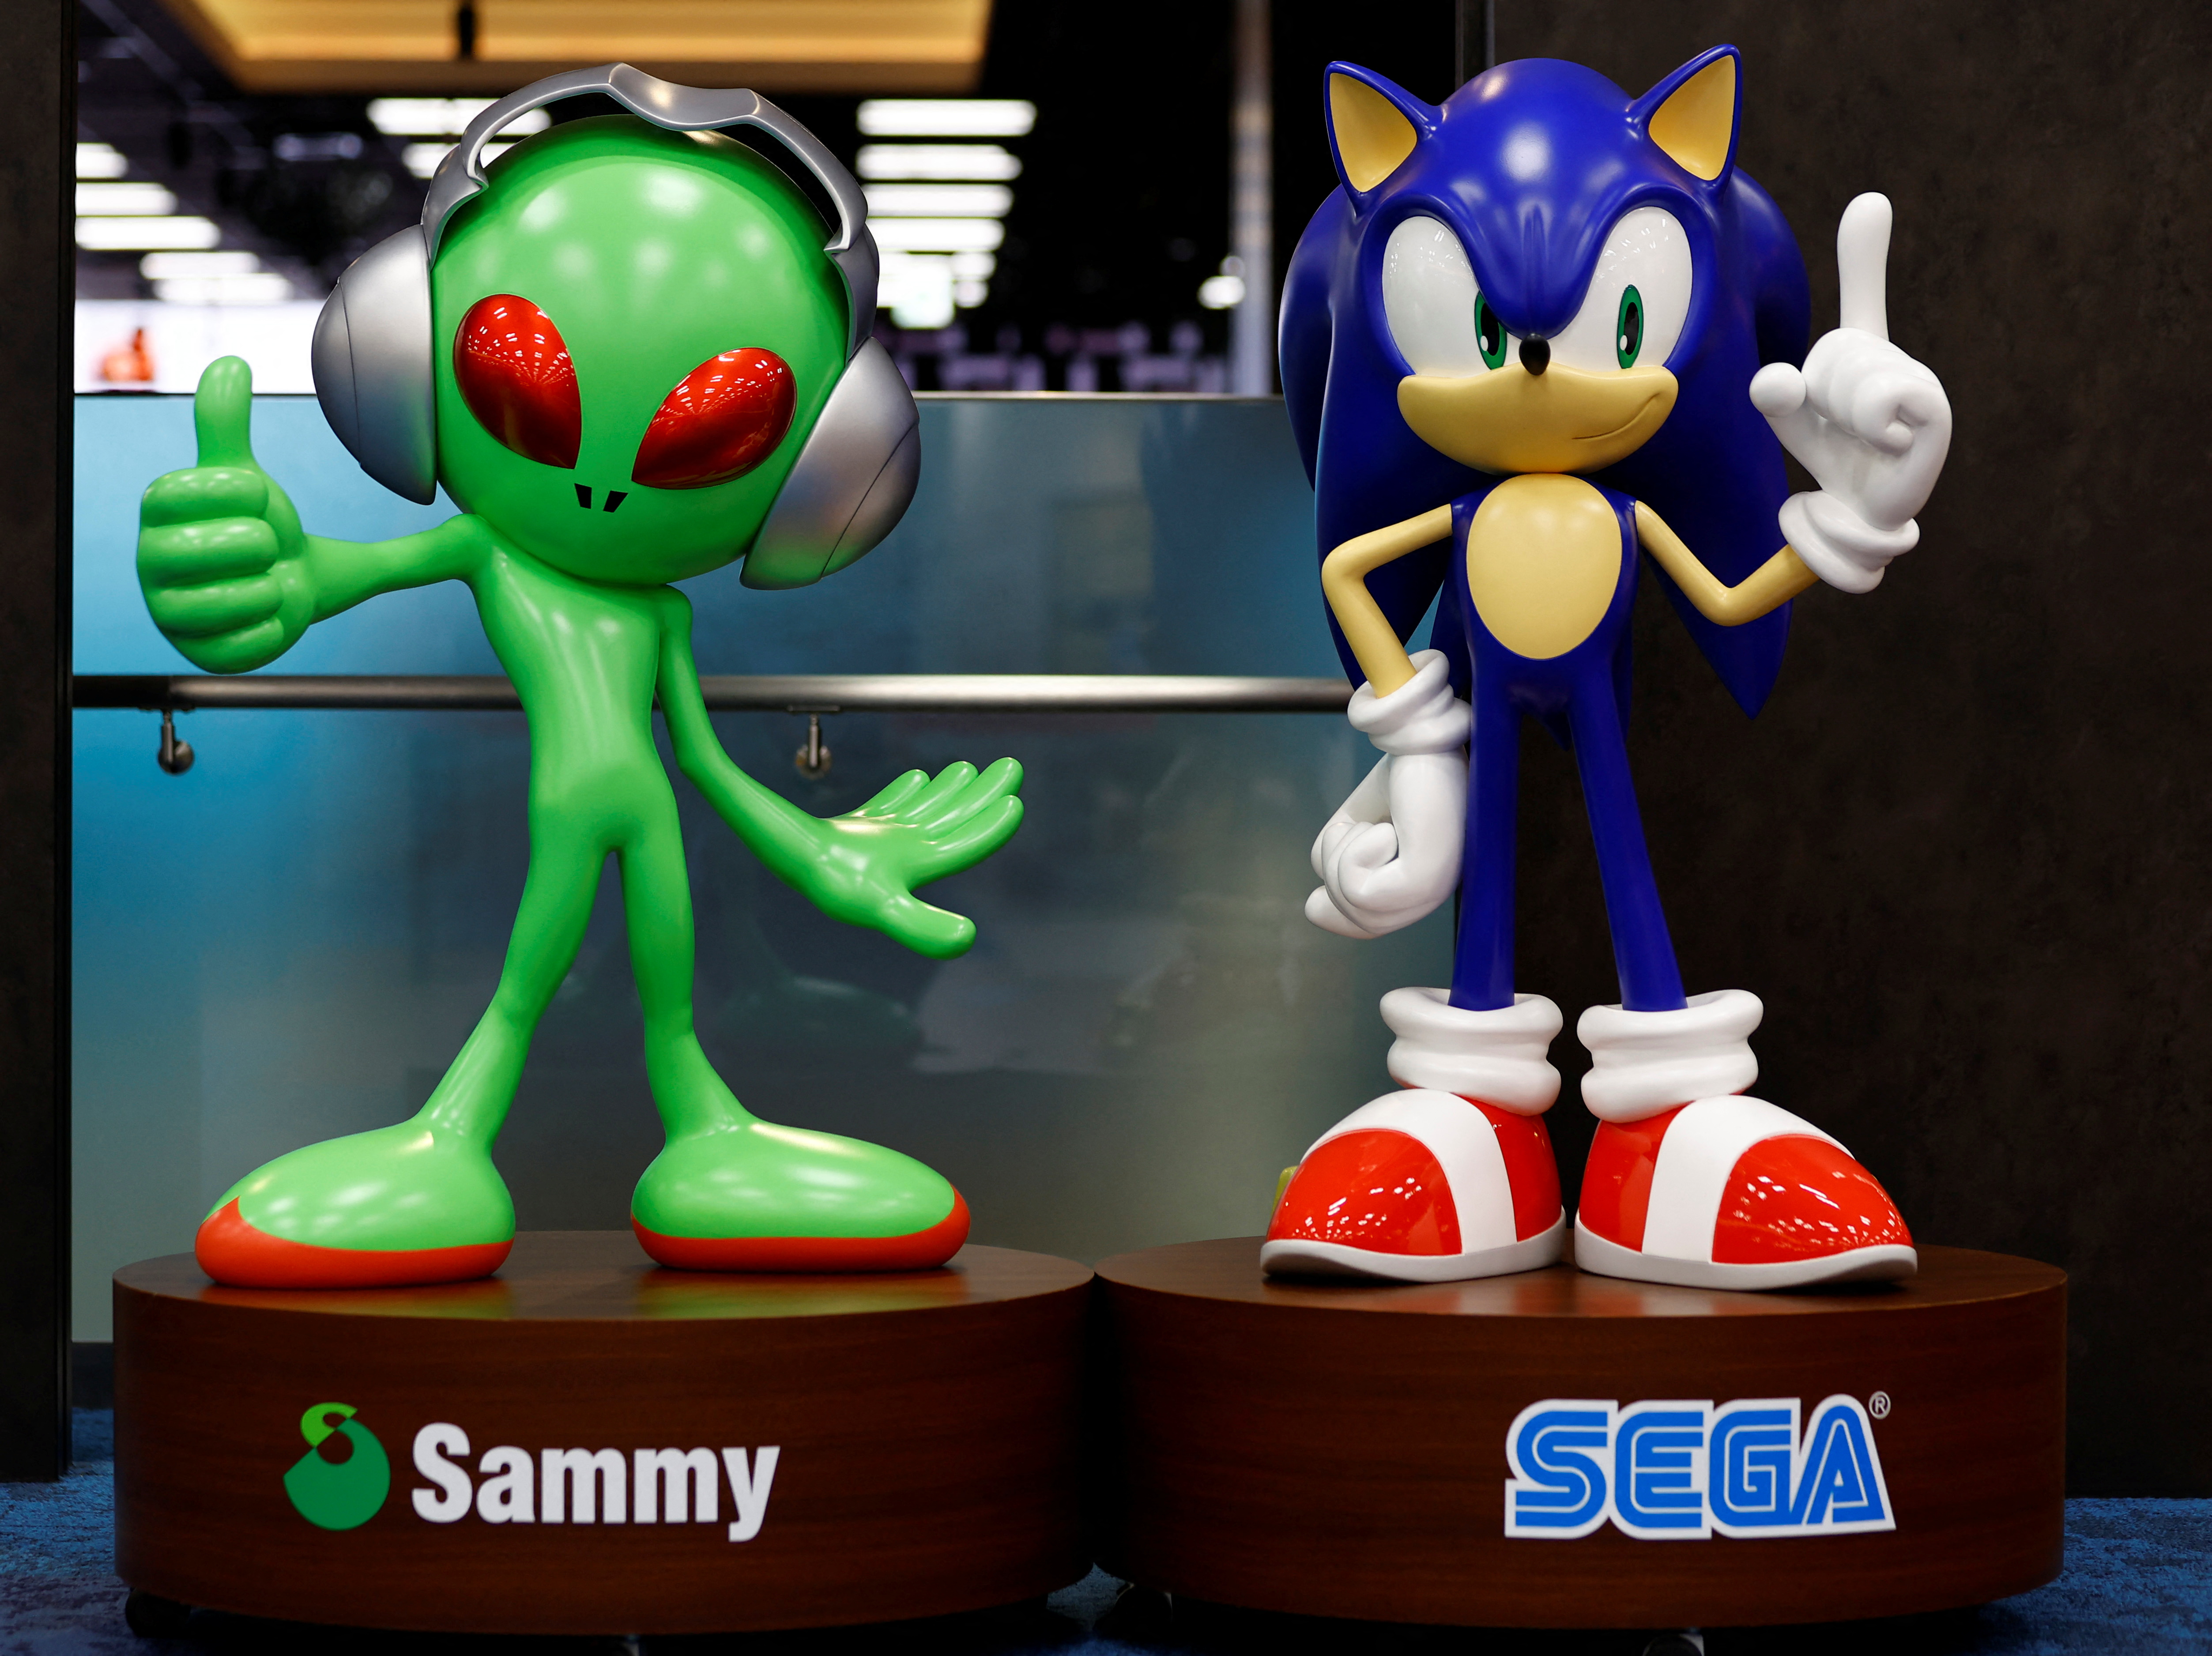 A model of Sega Sammy character Aliyan and  Sega character Sonic the Hedgehog are pictured at its headquarters in Tokyo